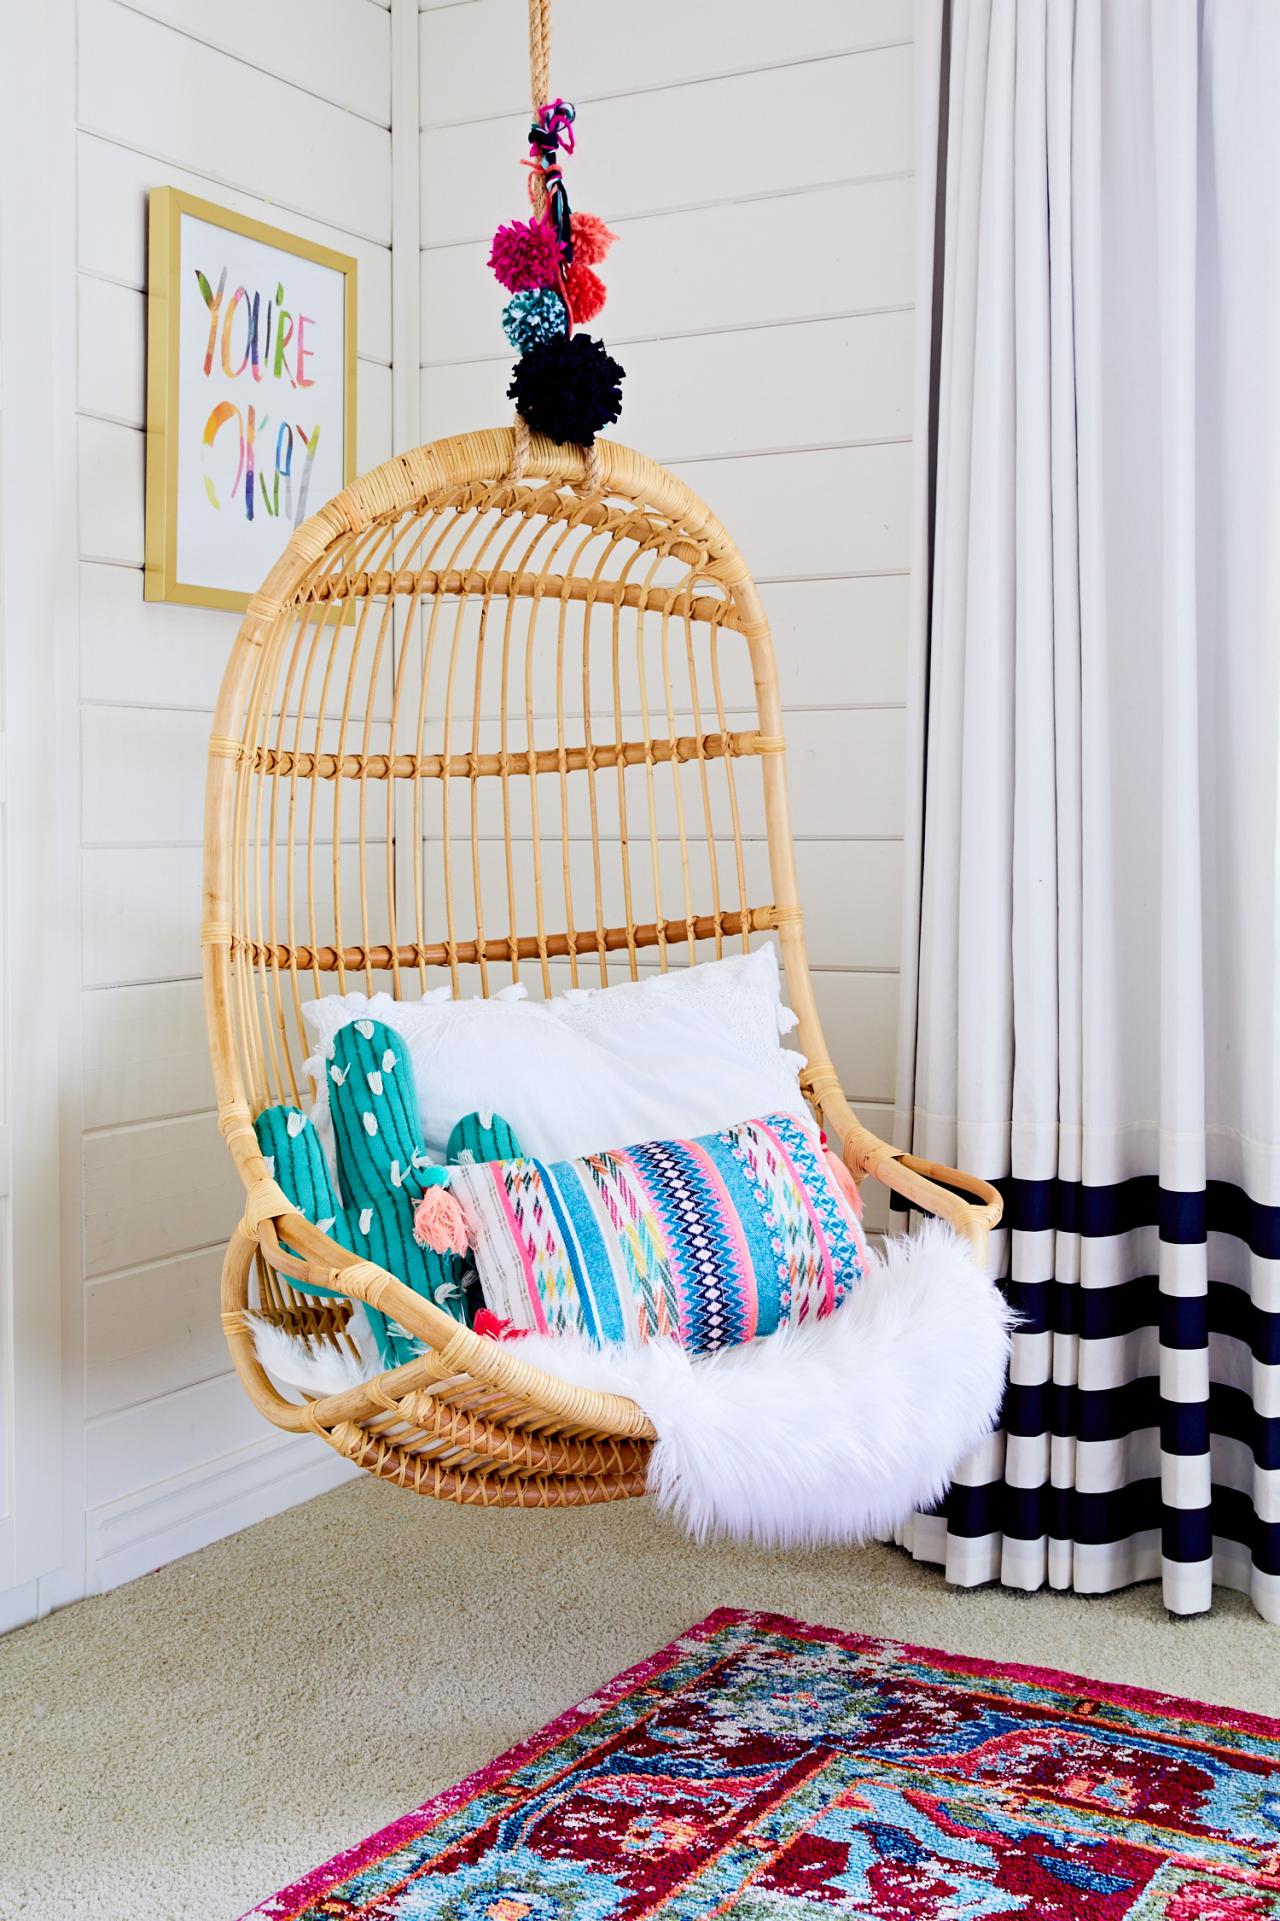 Rattan Swing Chairs Are the Cool, Boho Look of Summer